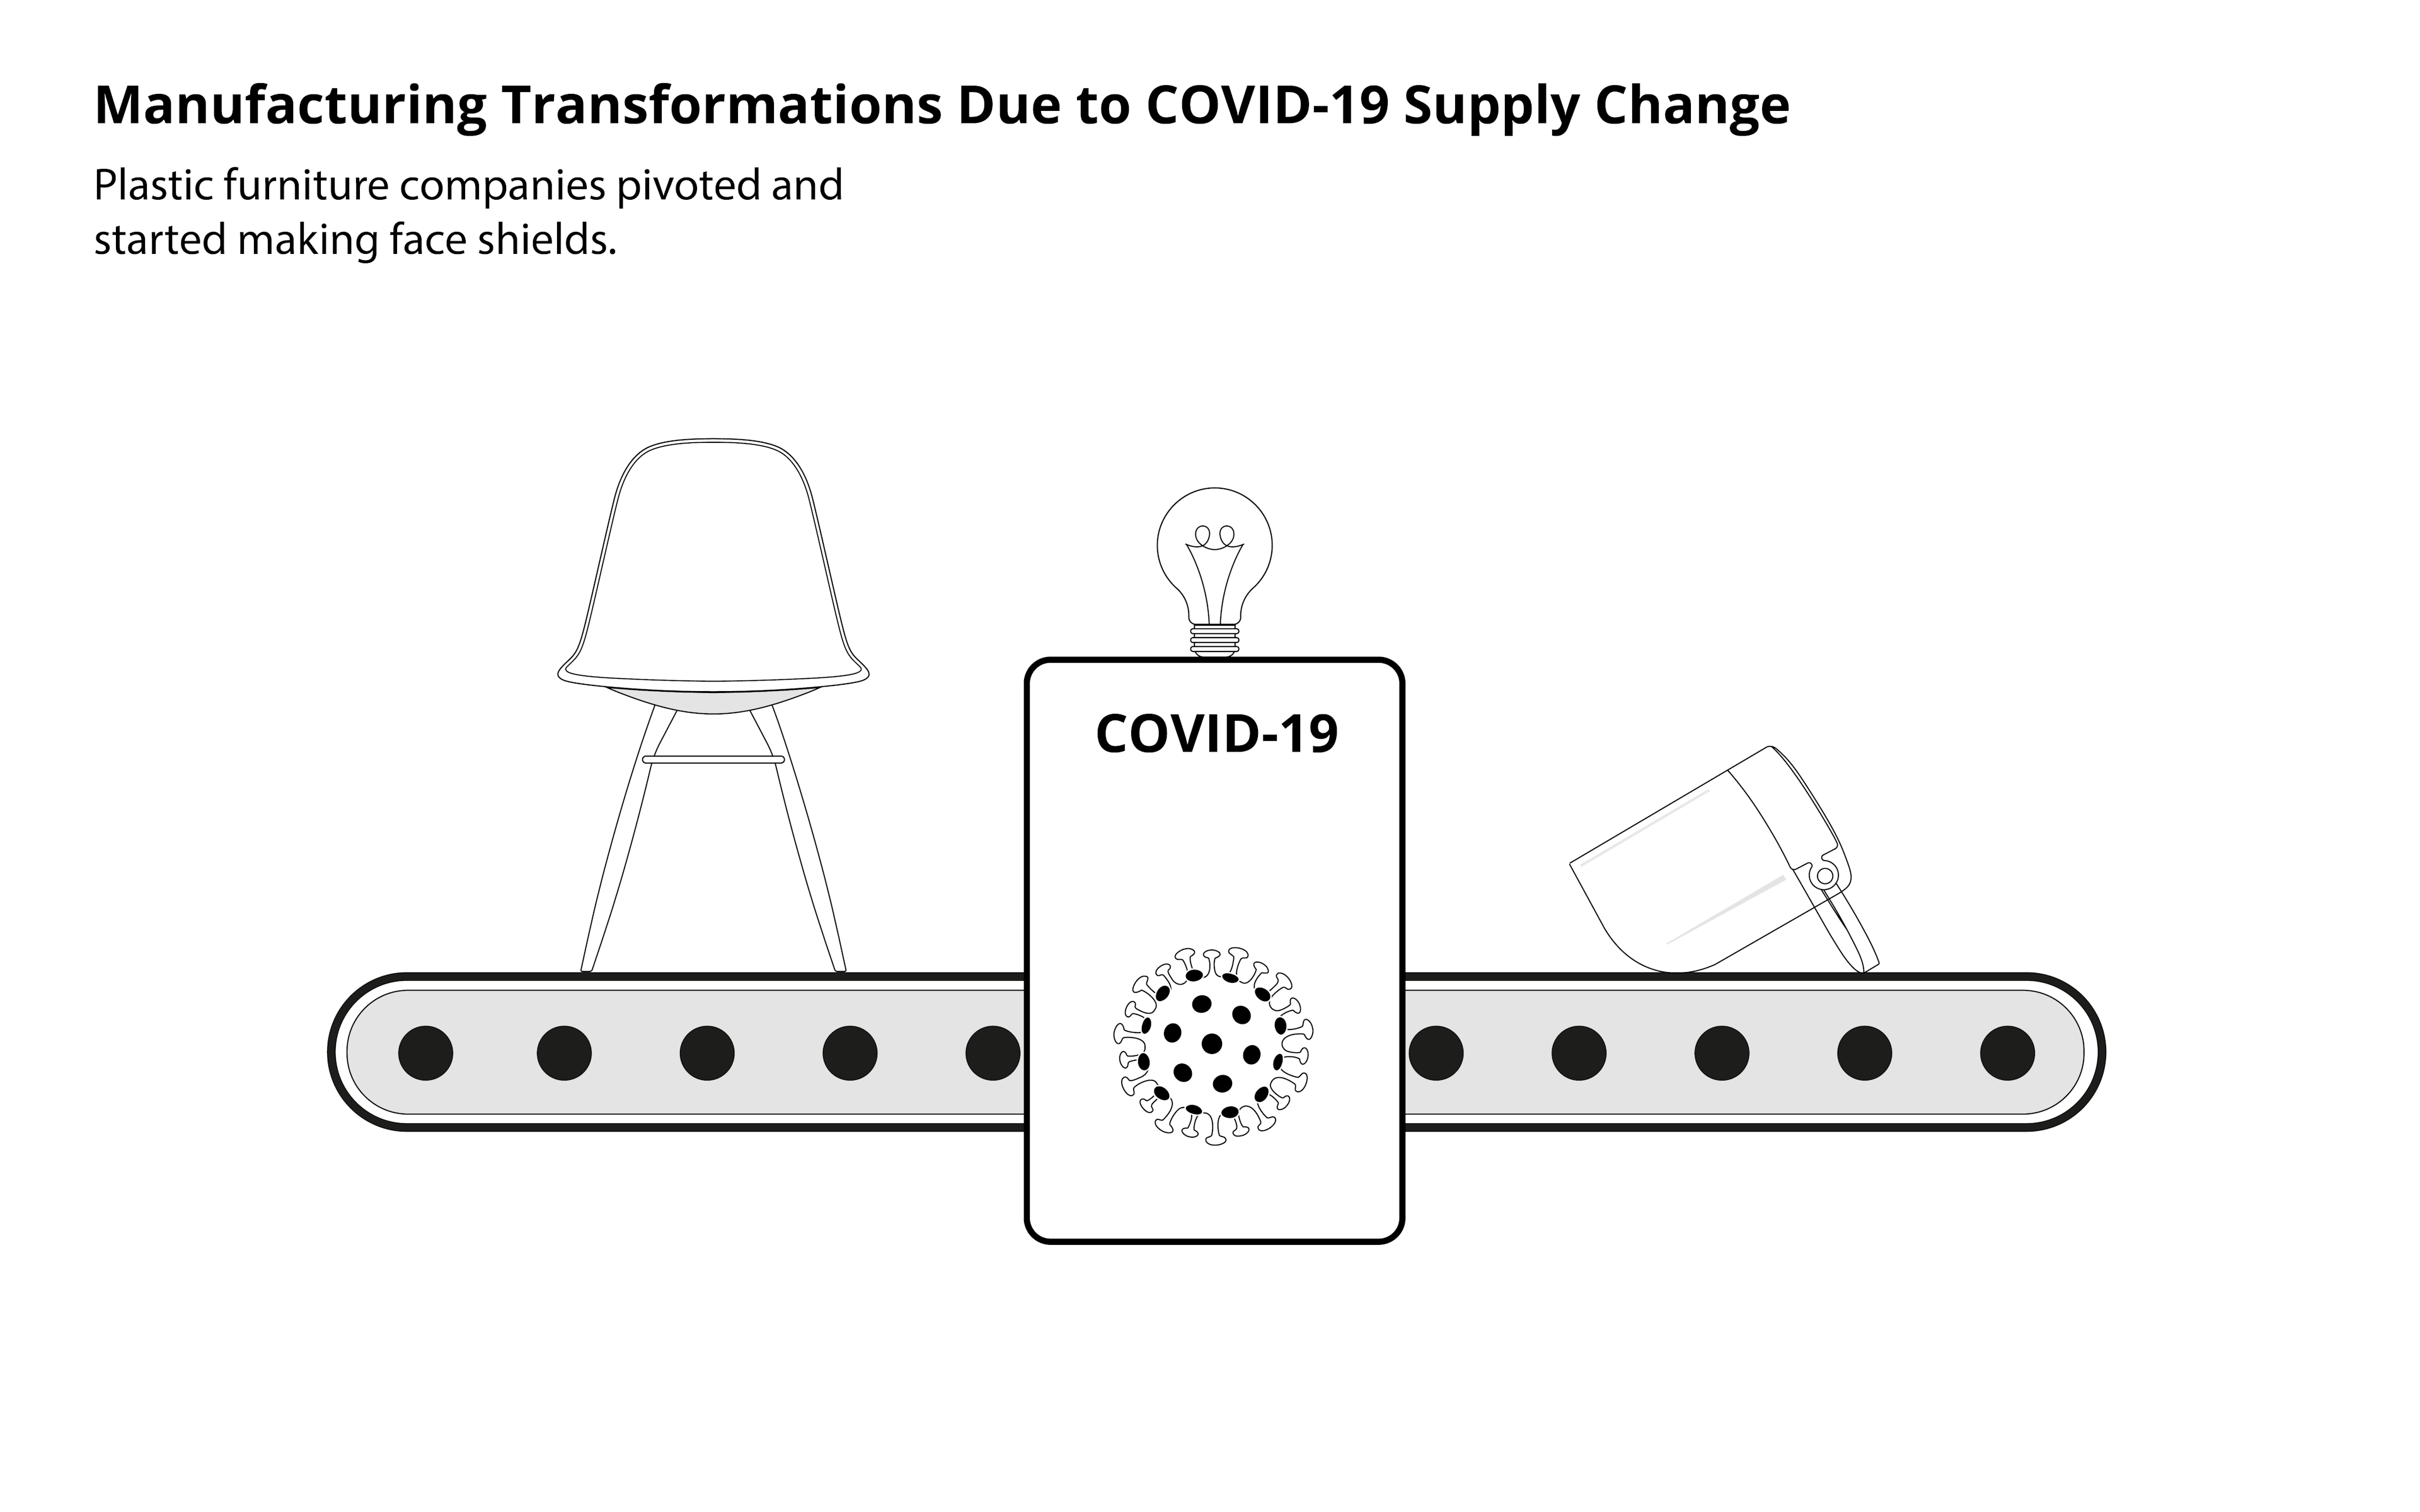 Manufacturing Transformations Due to COVID-19 Supply Change